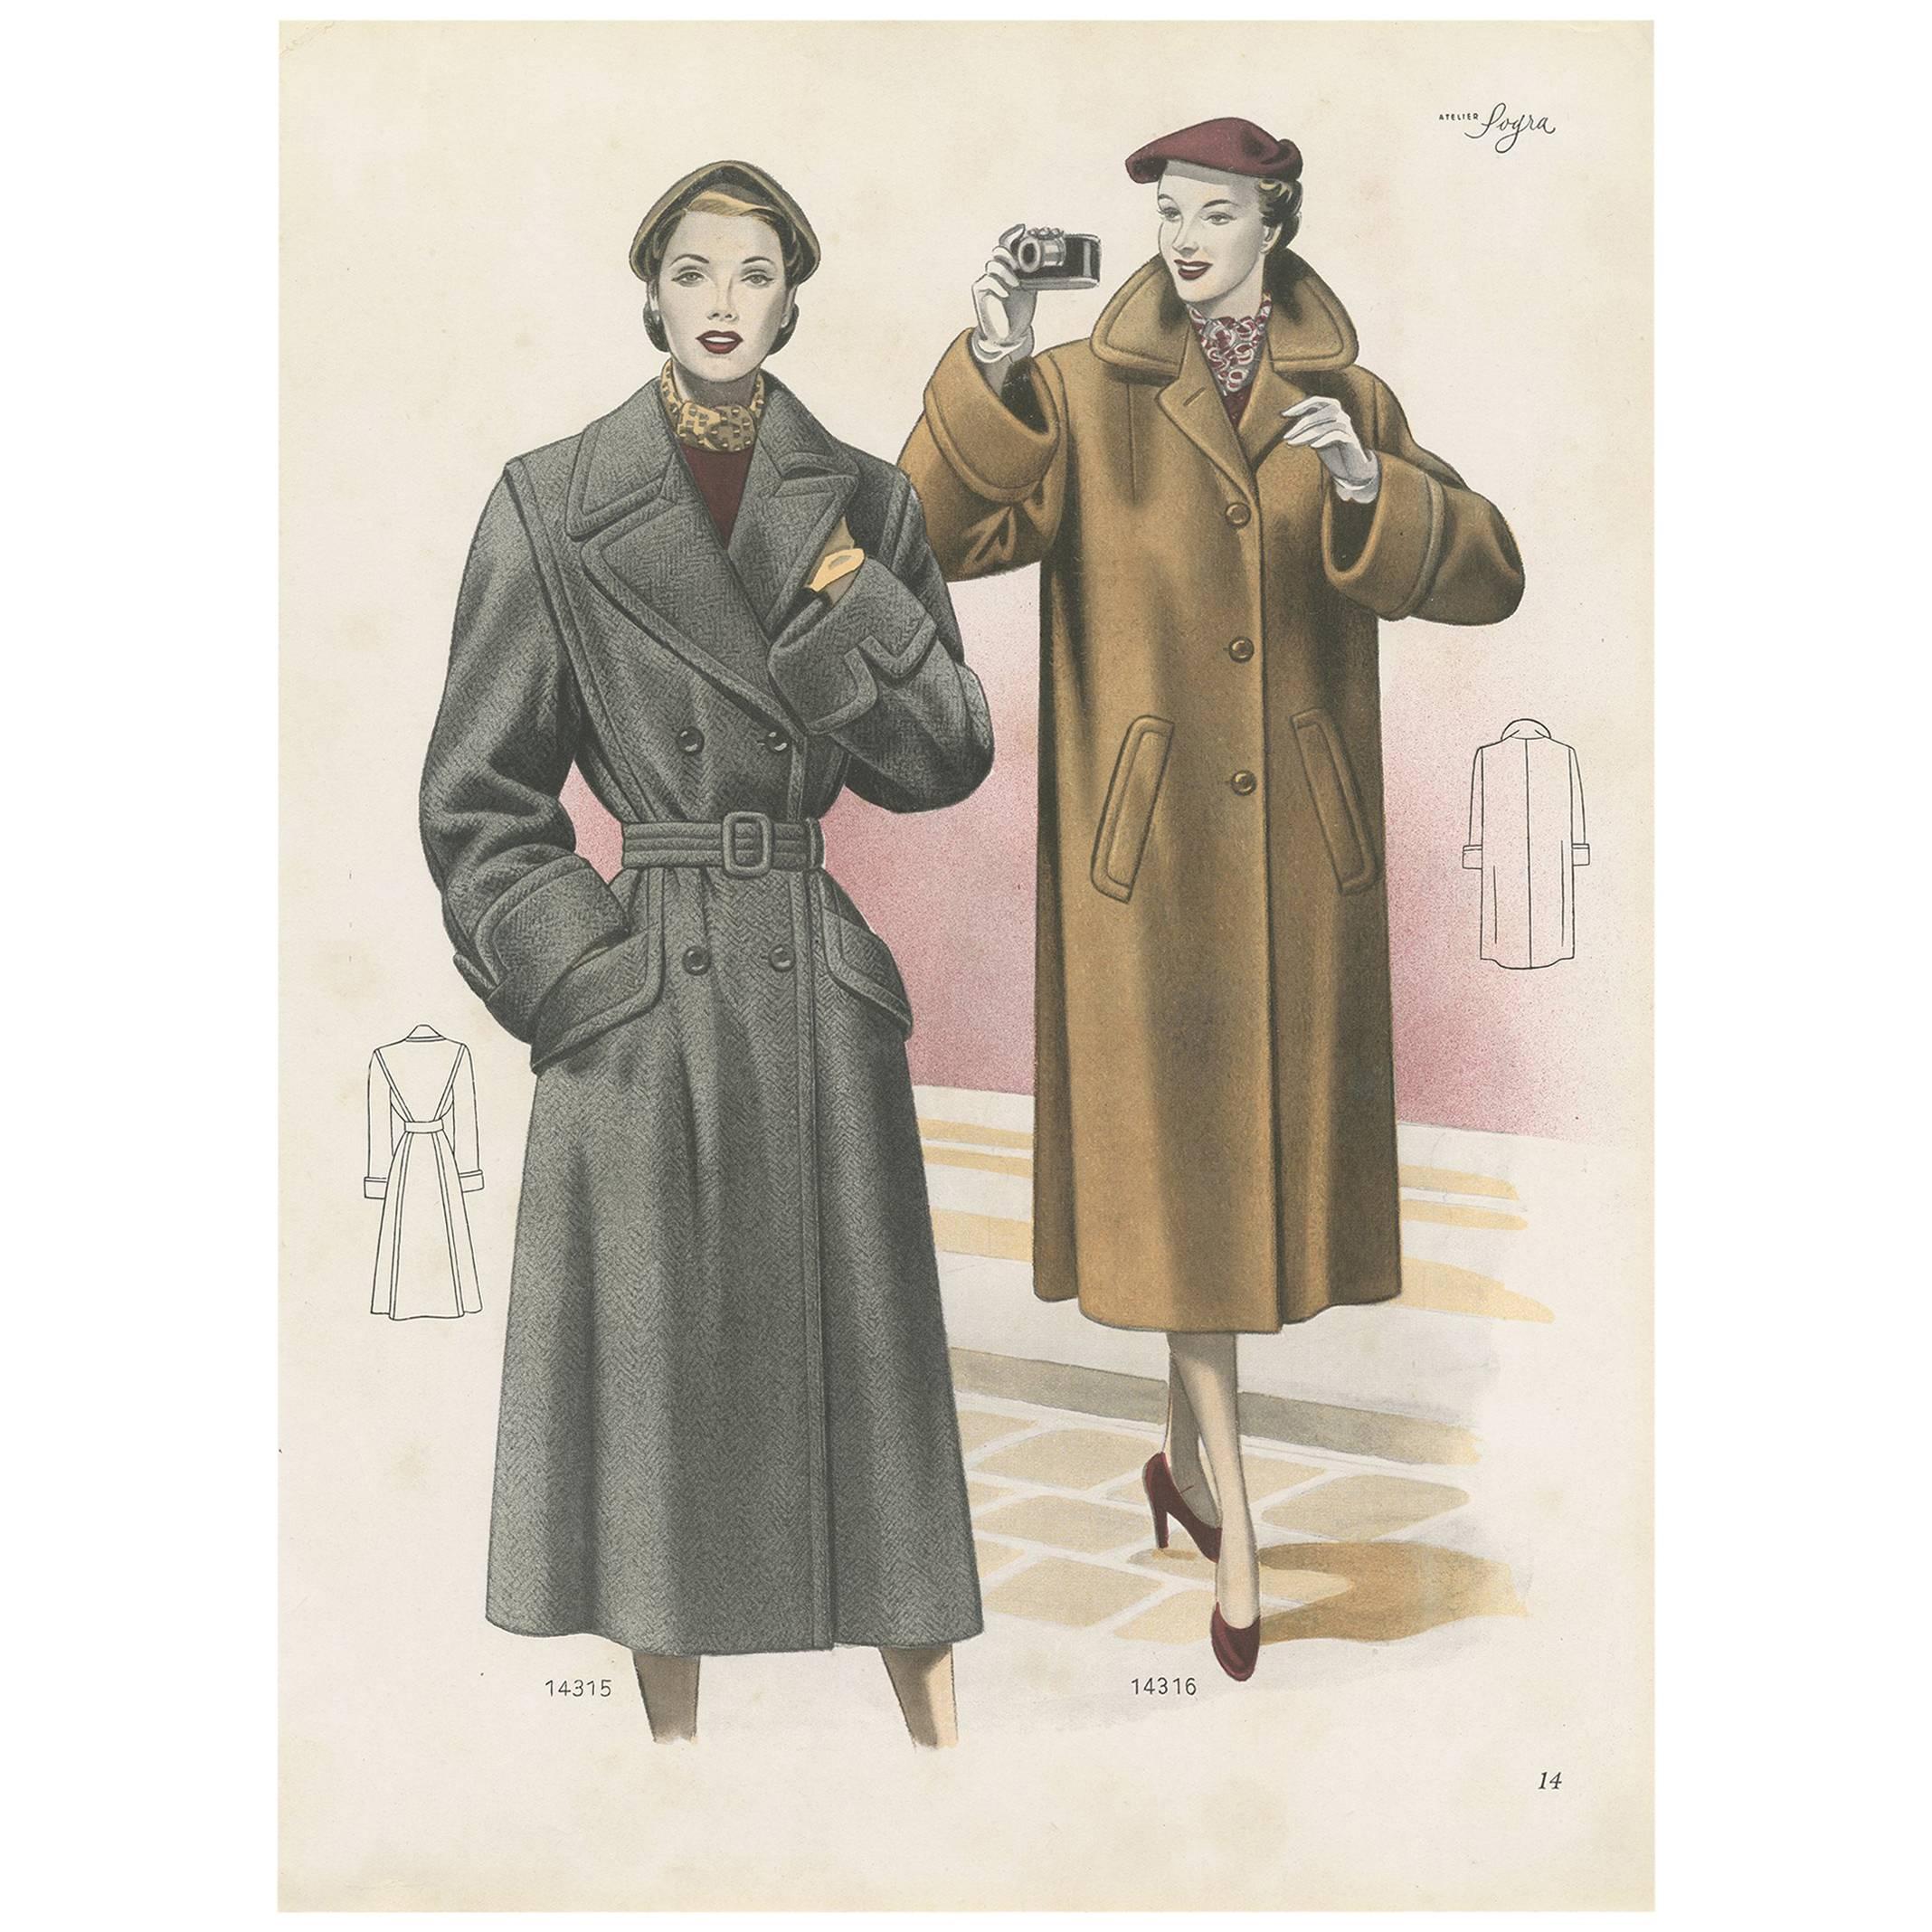 Vintage Fashion Print 'Pl. 14315' published in Ladies Styles, 1952